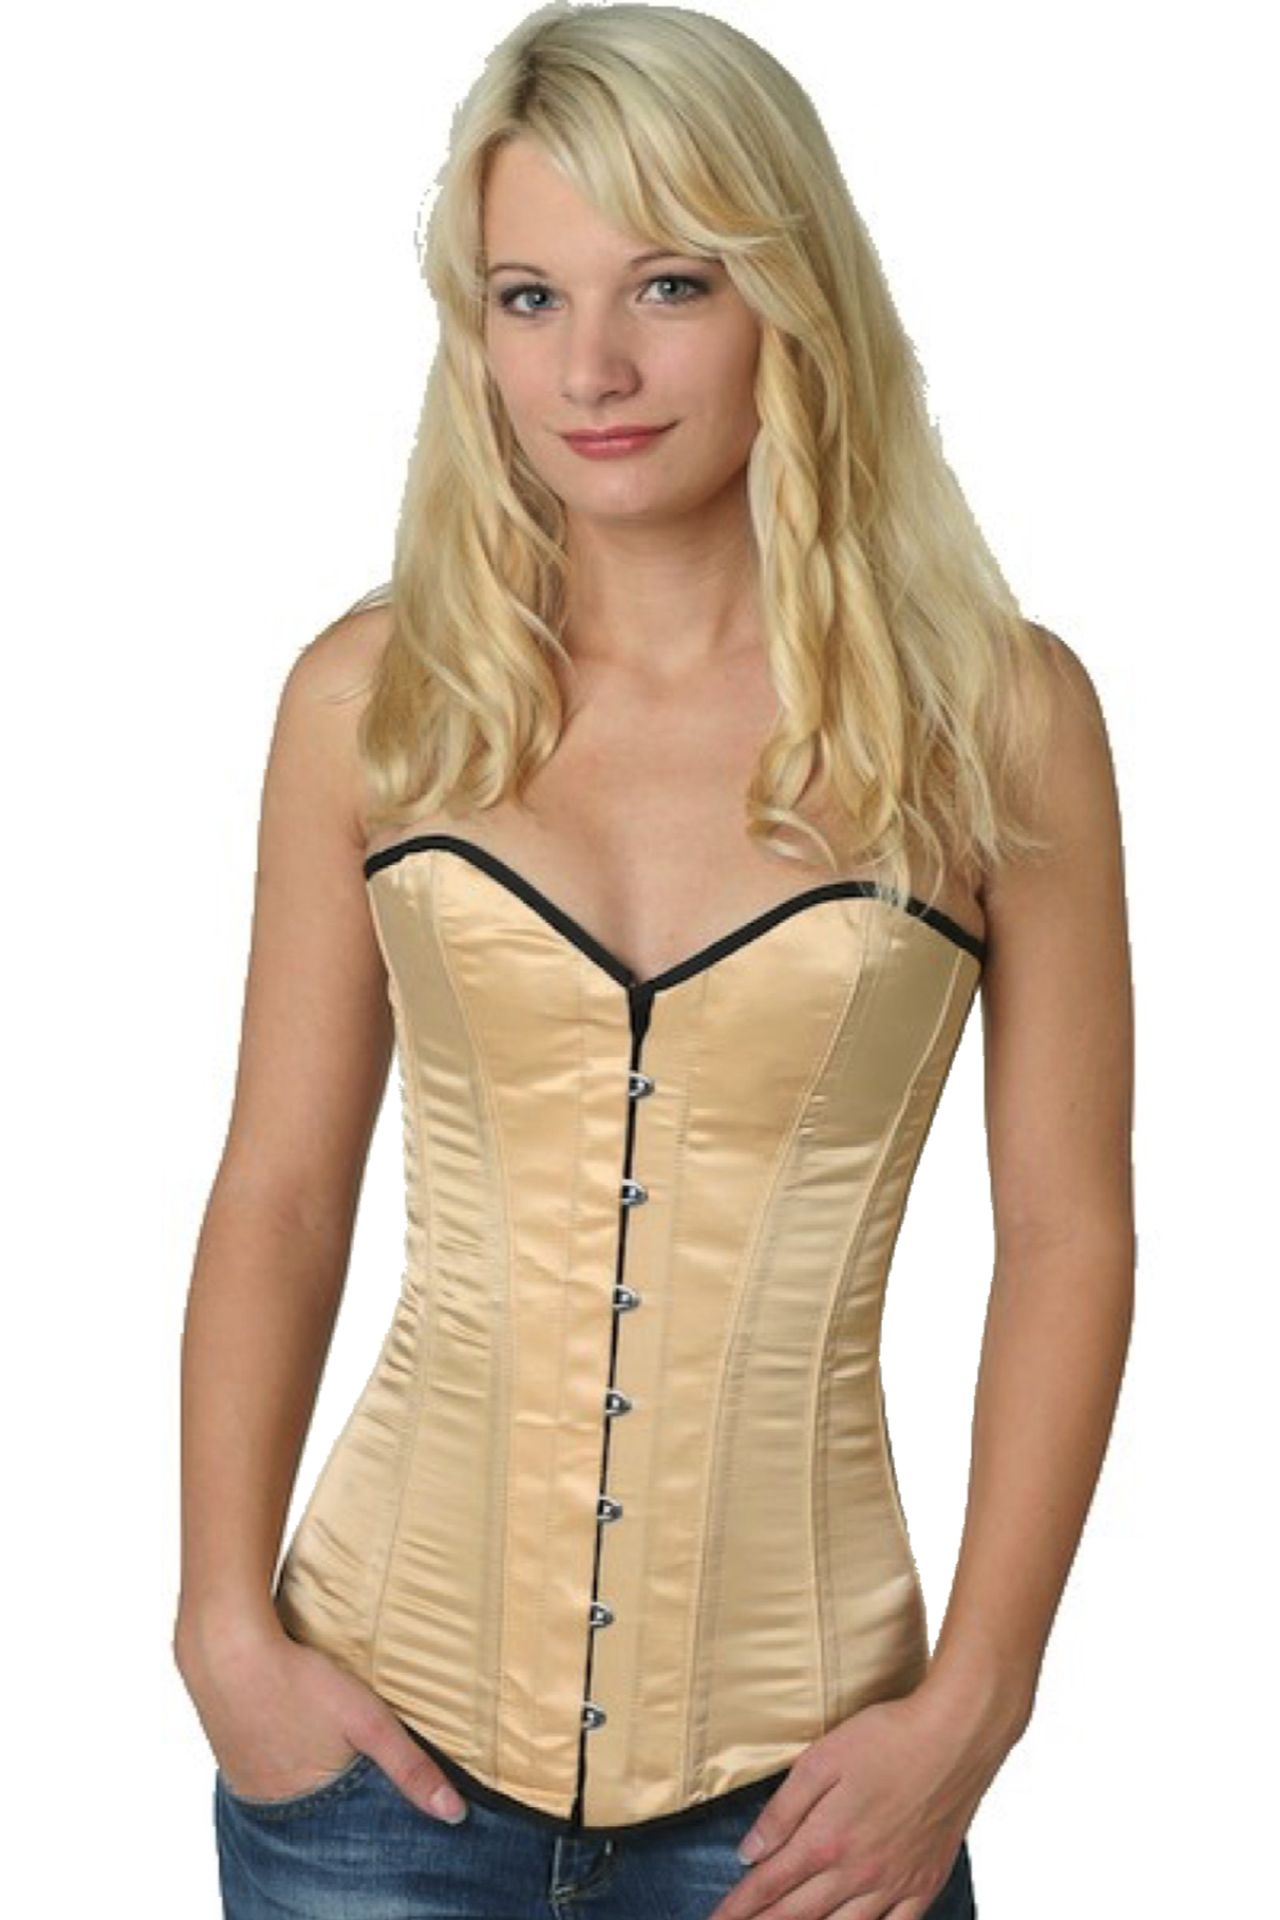 Corsetto beige satin overbust sy11